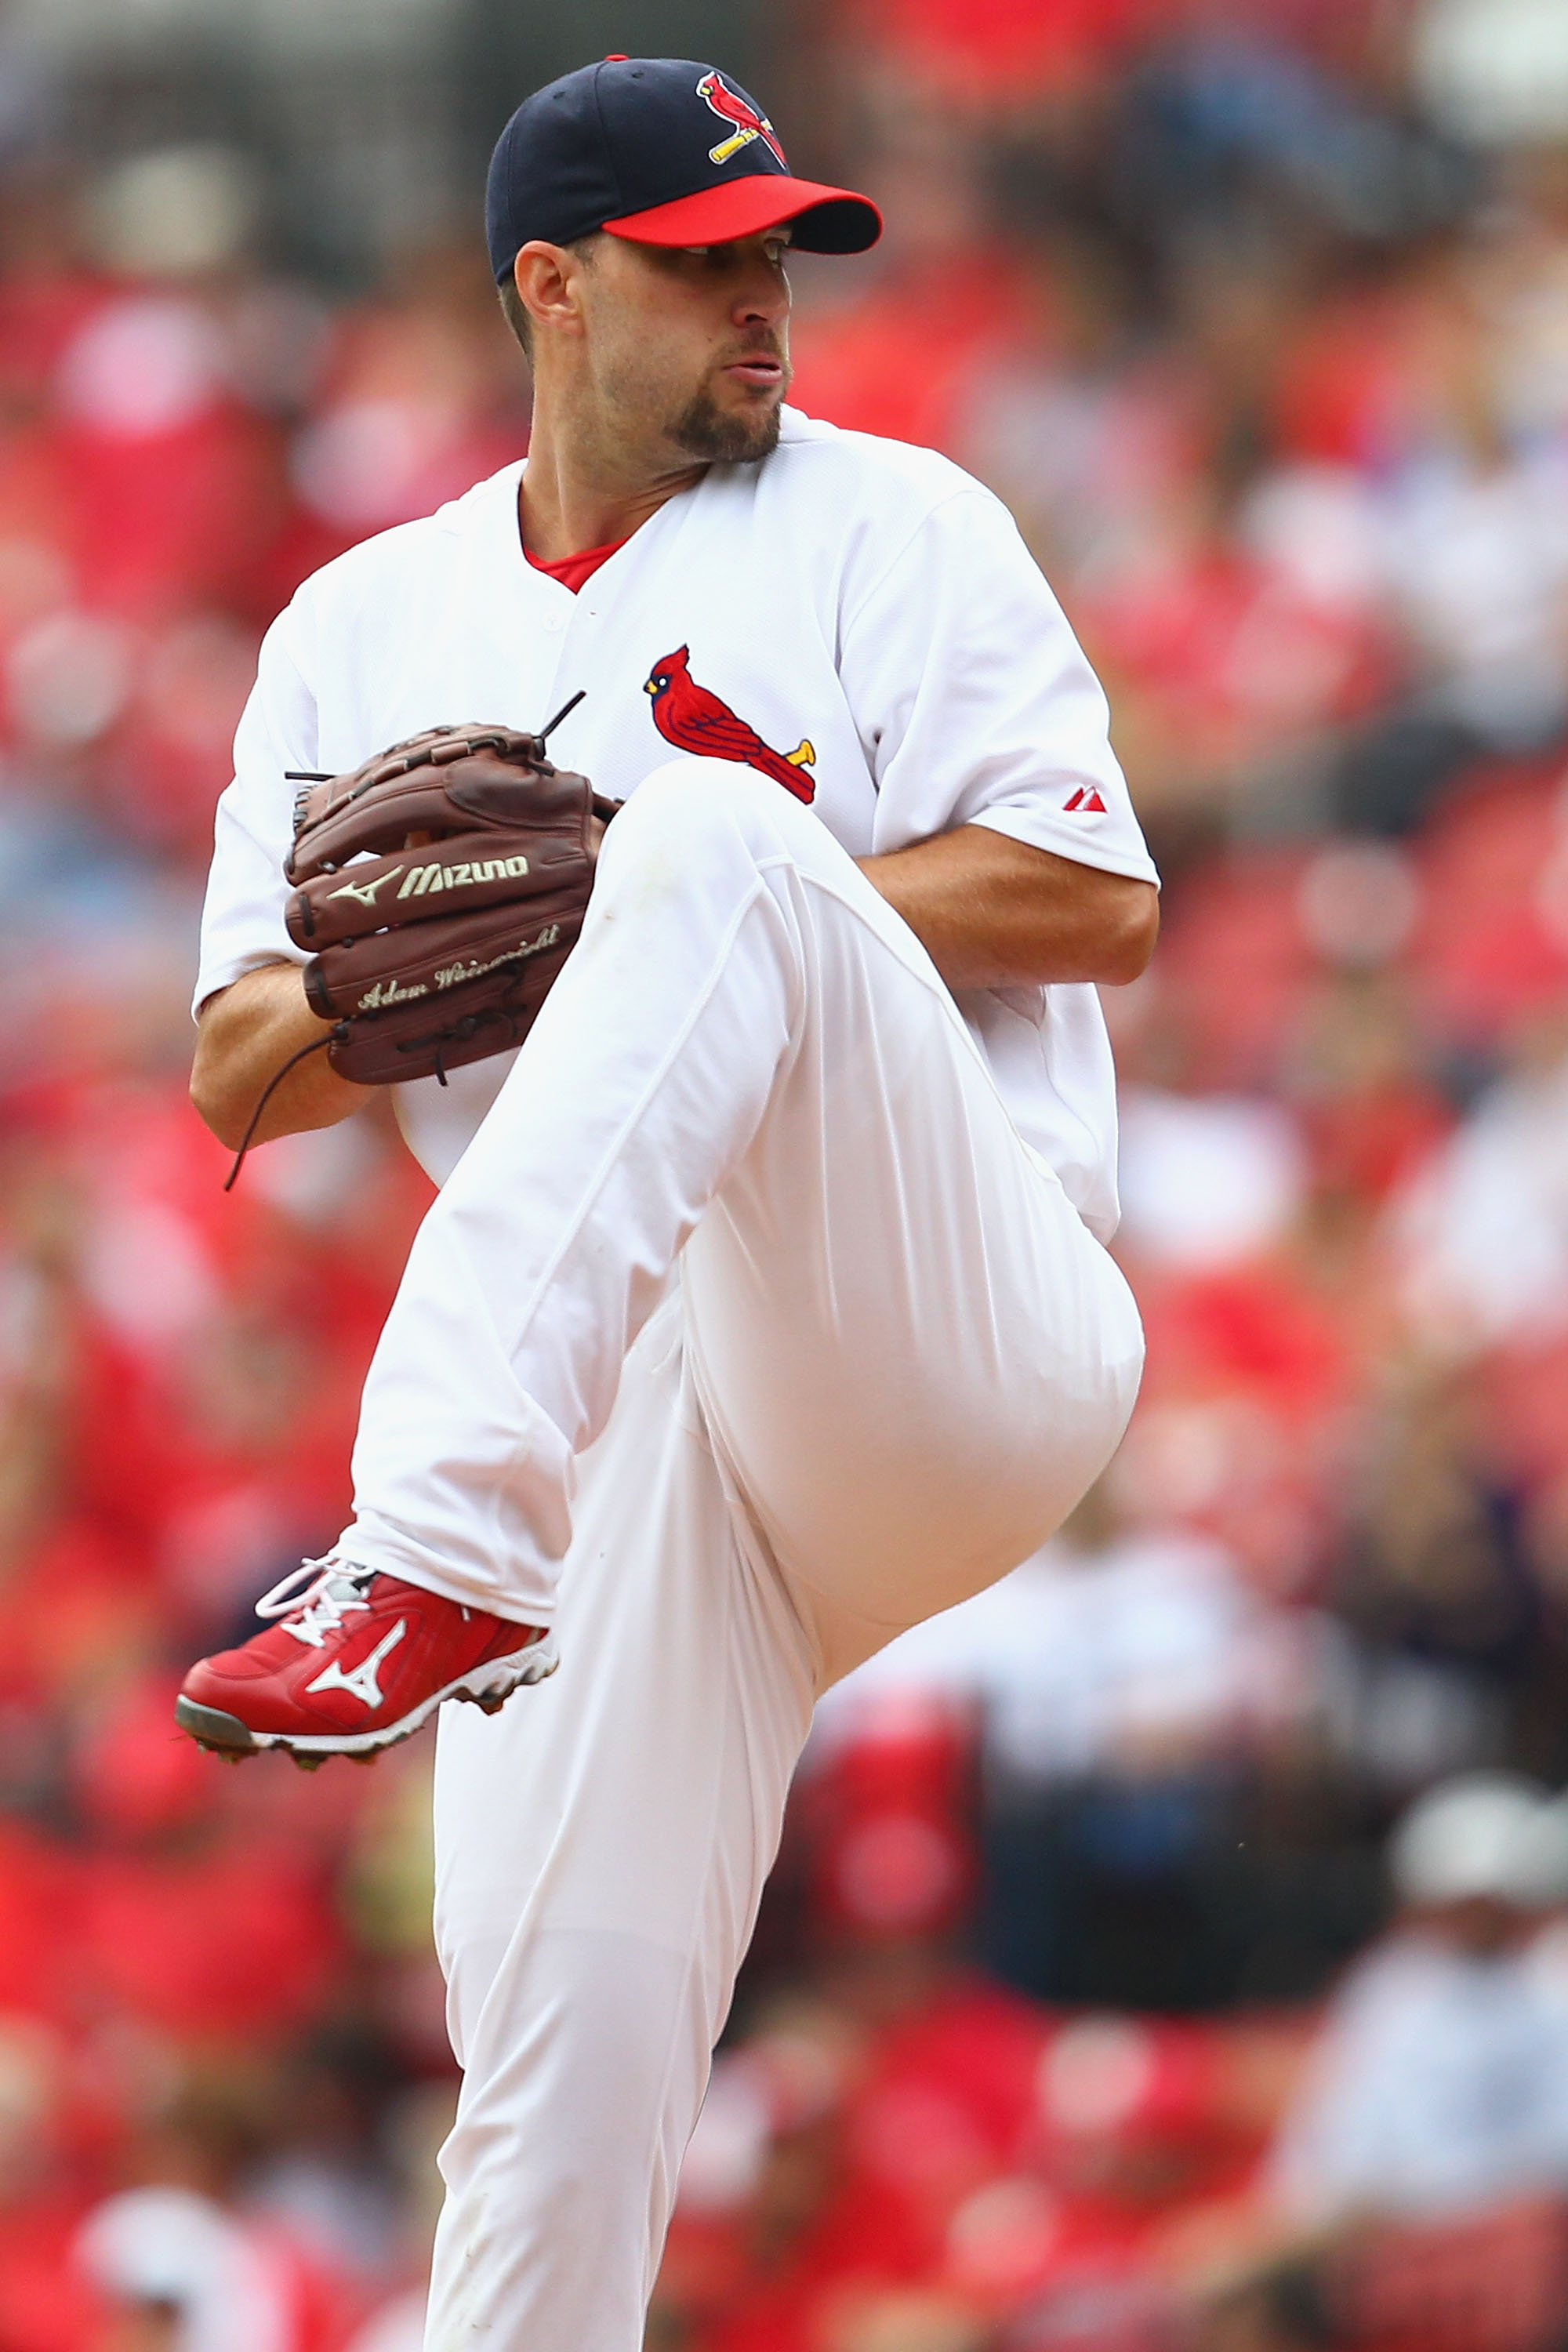 ST. LOUIS - SEPTEMBER 19: Starter Adam Wainwright #50 of the St. Louis Cardinals pitches against the San Diego Padres at Busch Stadium on September 19, 2010 in St. Louis, Missouri.  The Cardinals beat the Padres 4-1.  (Photo by Dilip Vishwanat/Getty Image